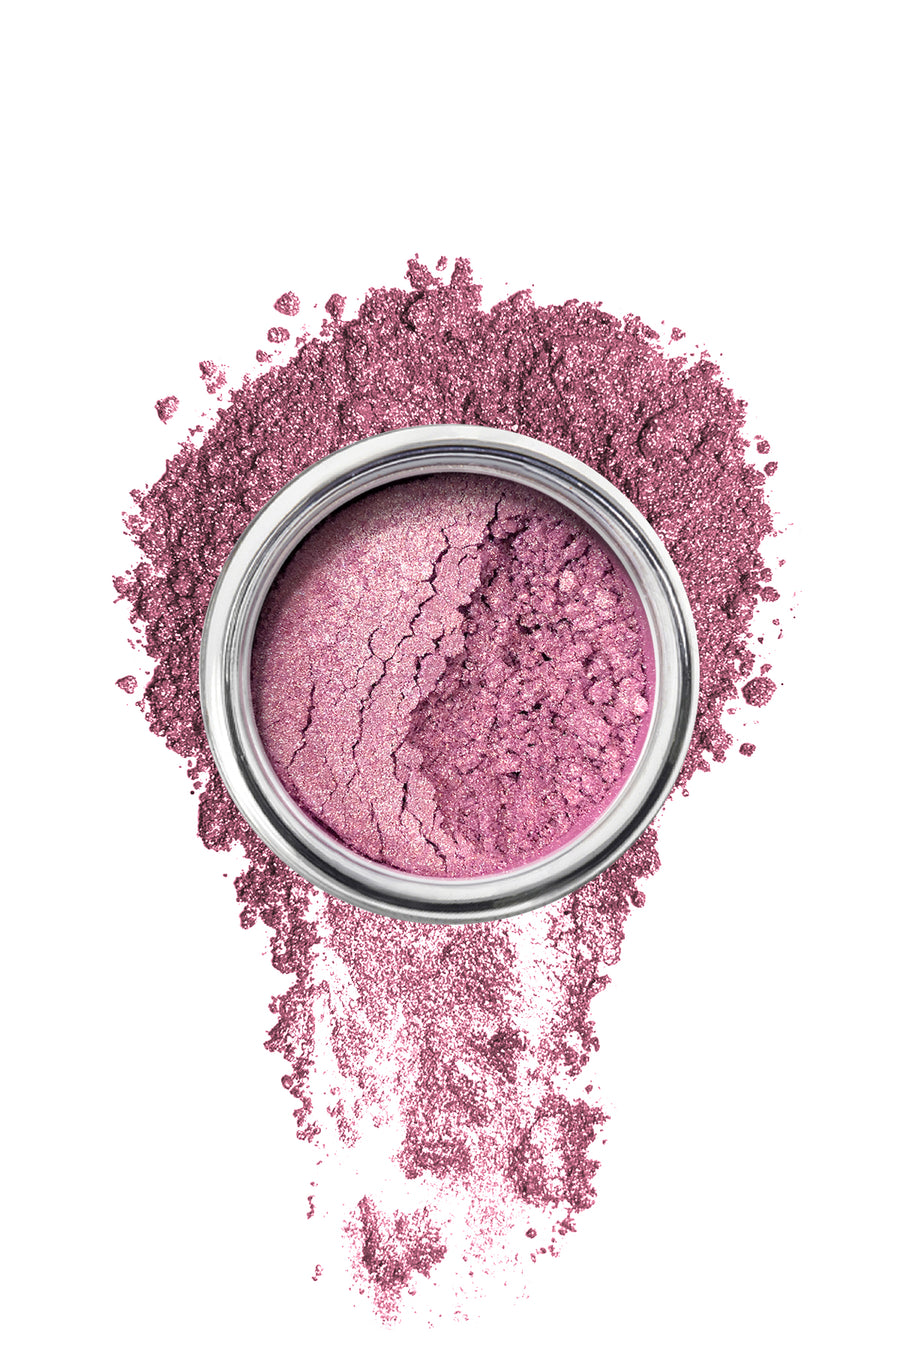 Shimmer Eyeshadow #36 - Natural Pink - Blend Mineral Cosmetics